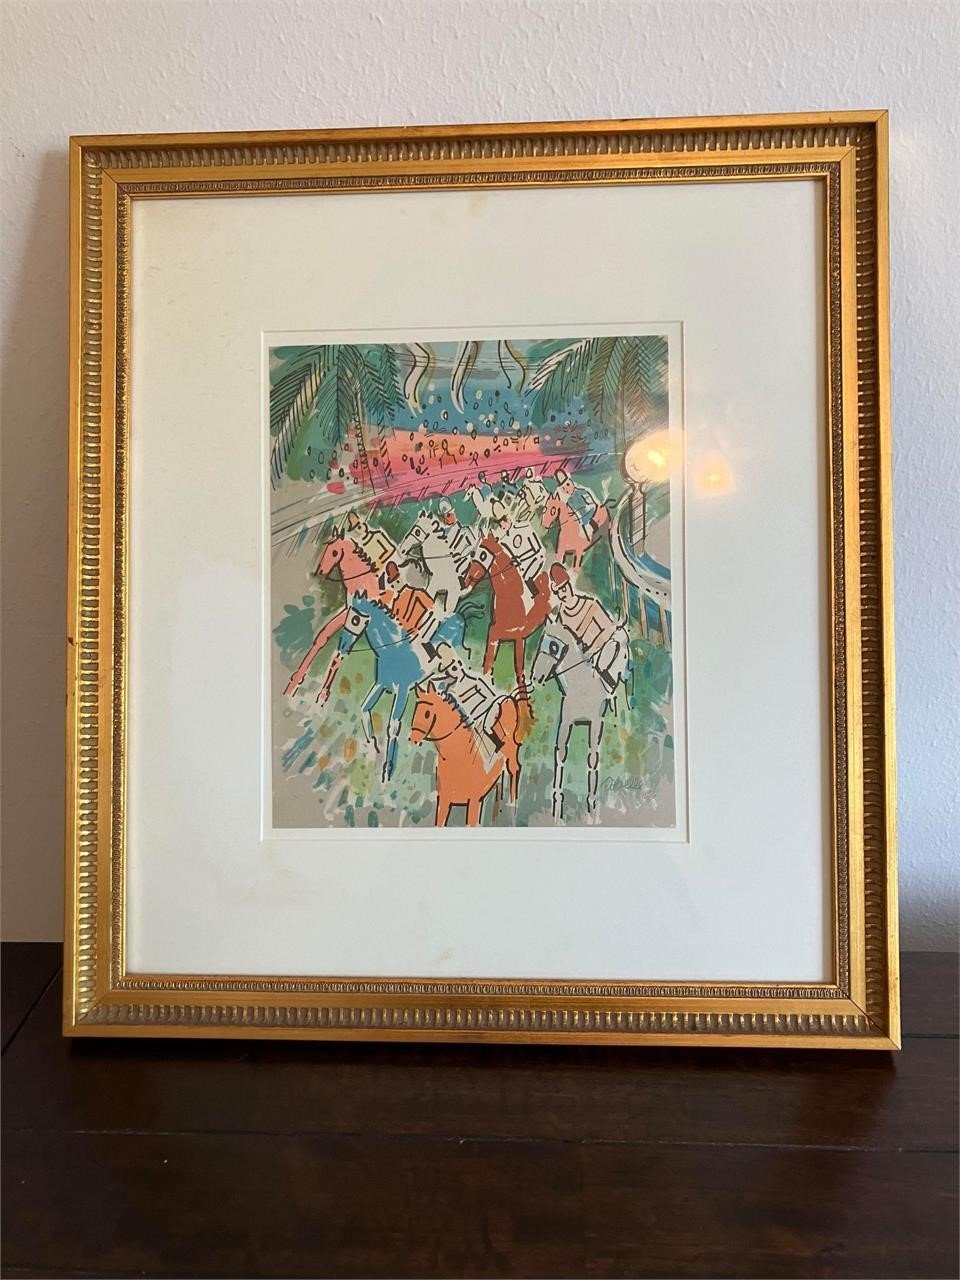 $350 Charles Cobelle "Longchamps" litho in colors